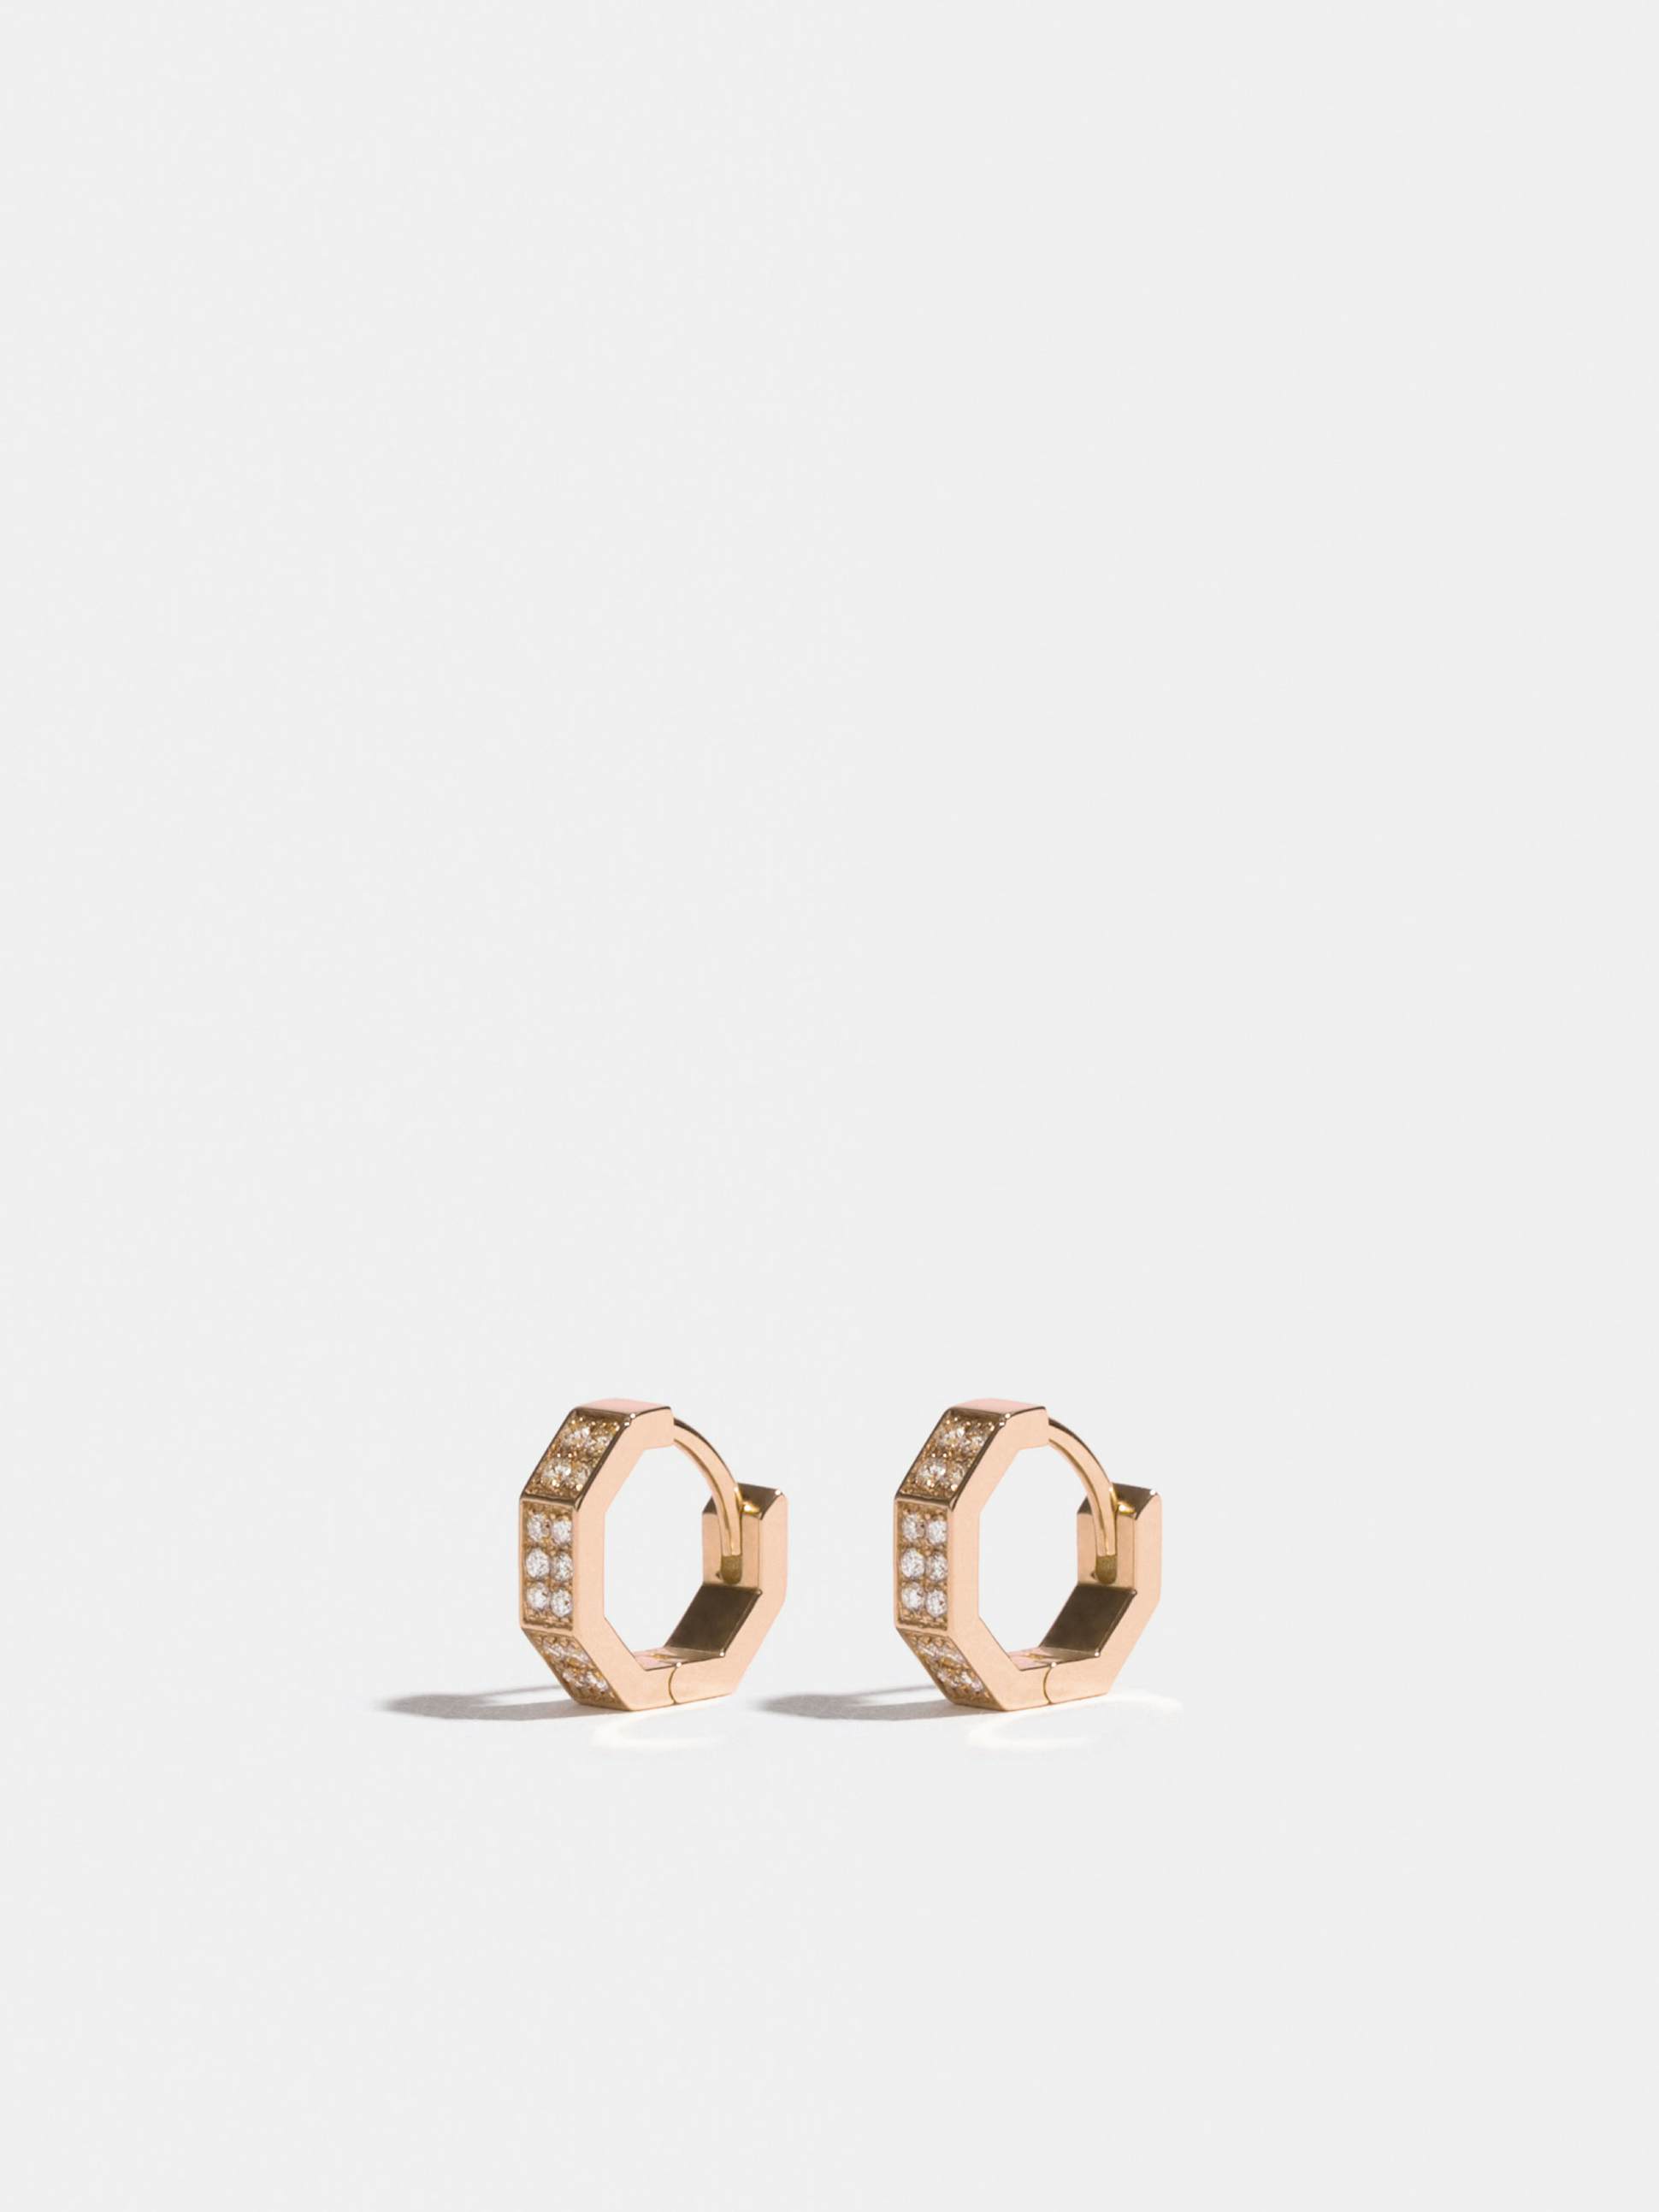 Octogone 10mm earrings in 18k Fairmined ethical rose gold, paved with lab-grown diamonds, the pair.